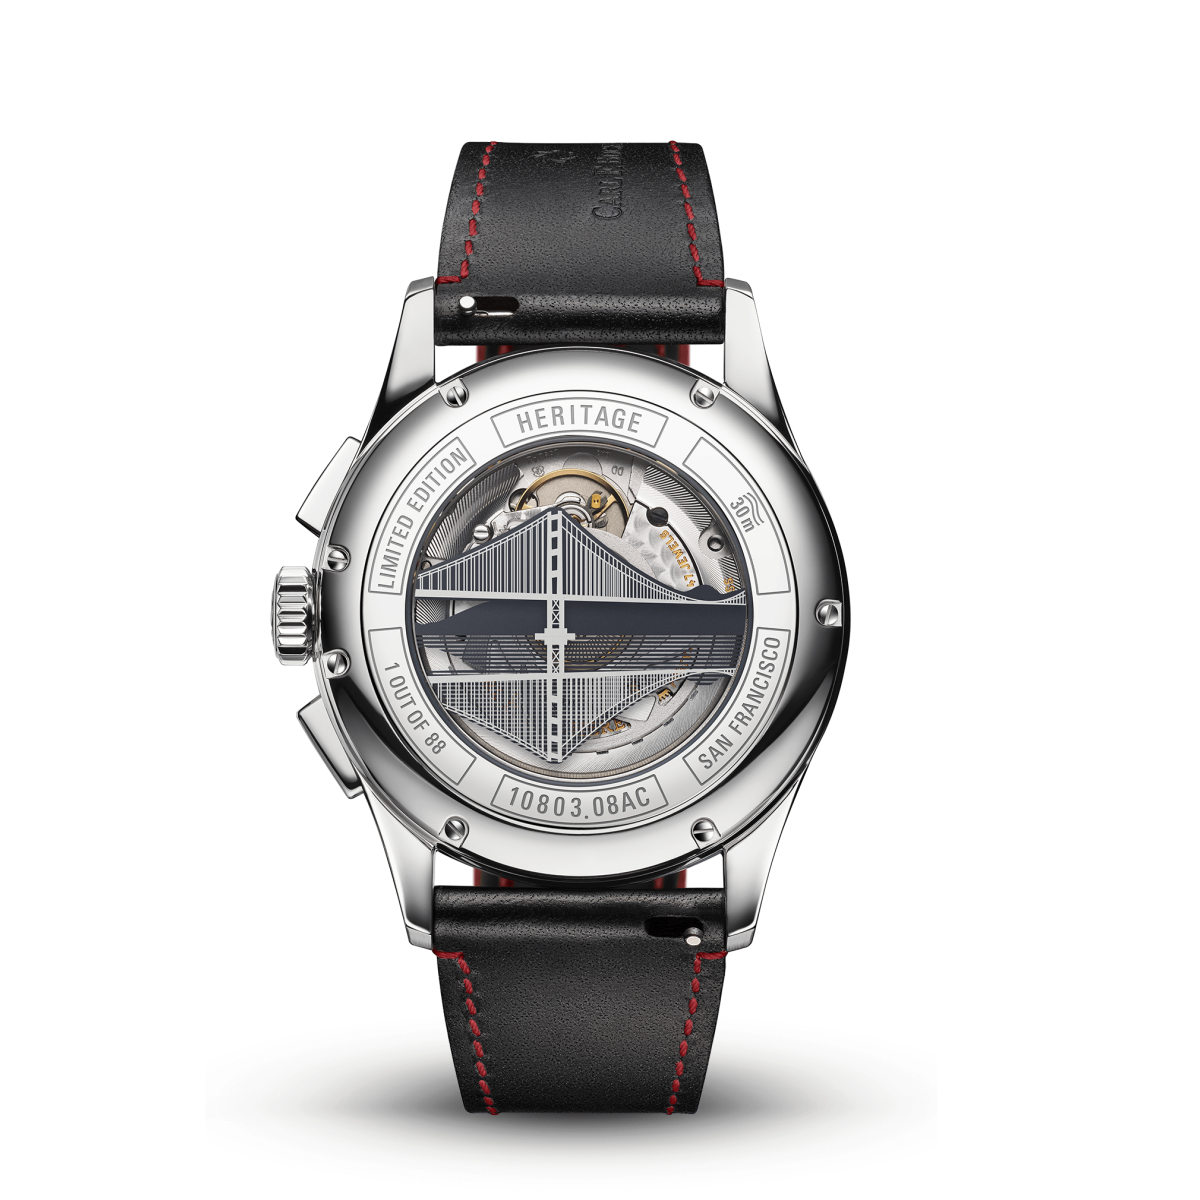 Carl F. Bucherer Haritage Chronograph Stainless steel Limited Edition Men's Watch